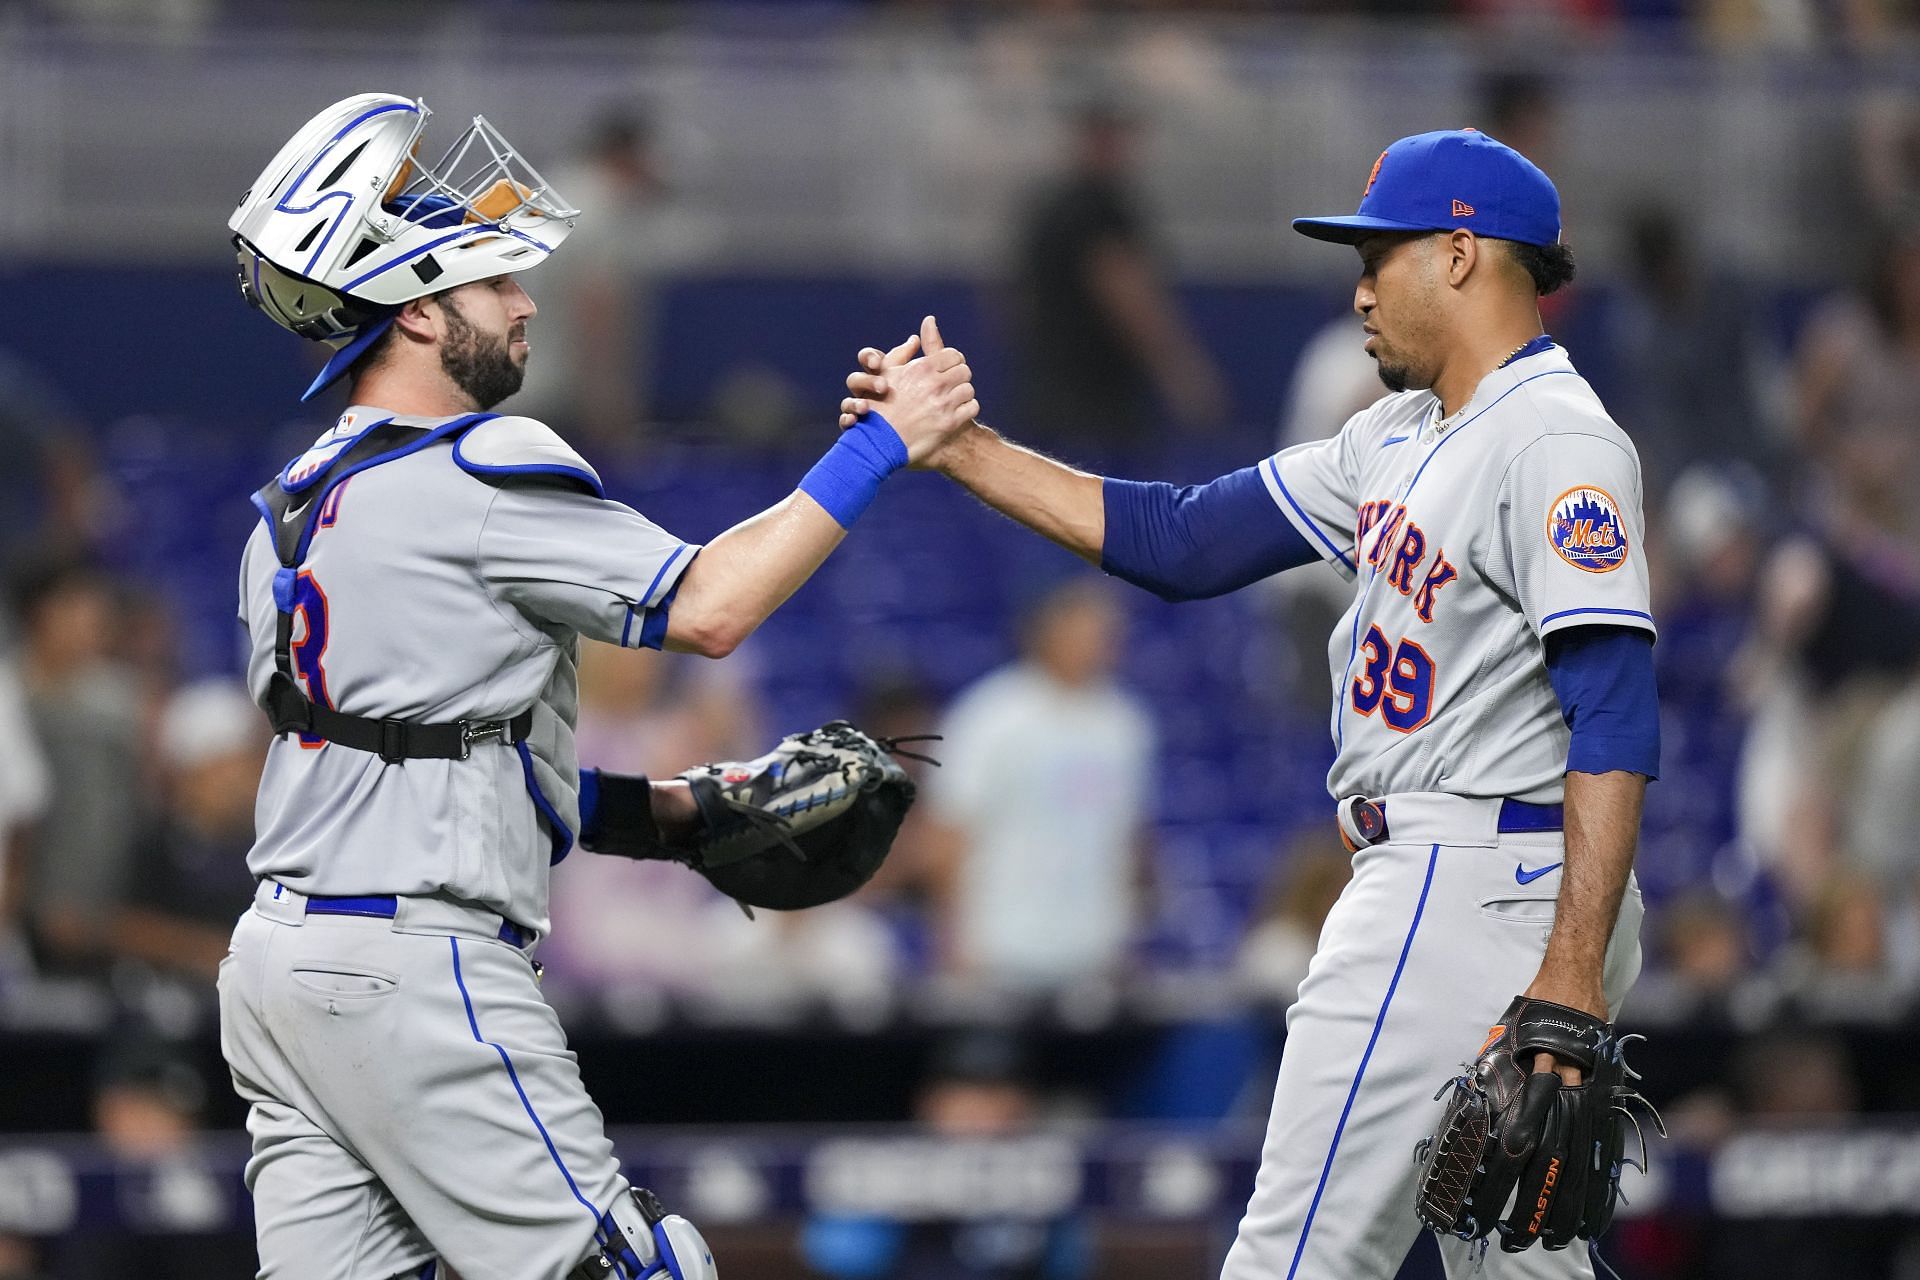 The New York Mets lead the National League with 46 wins.